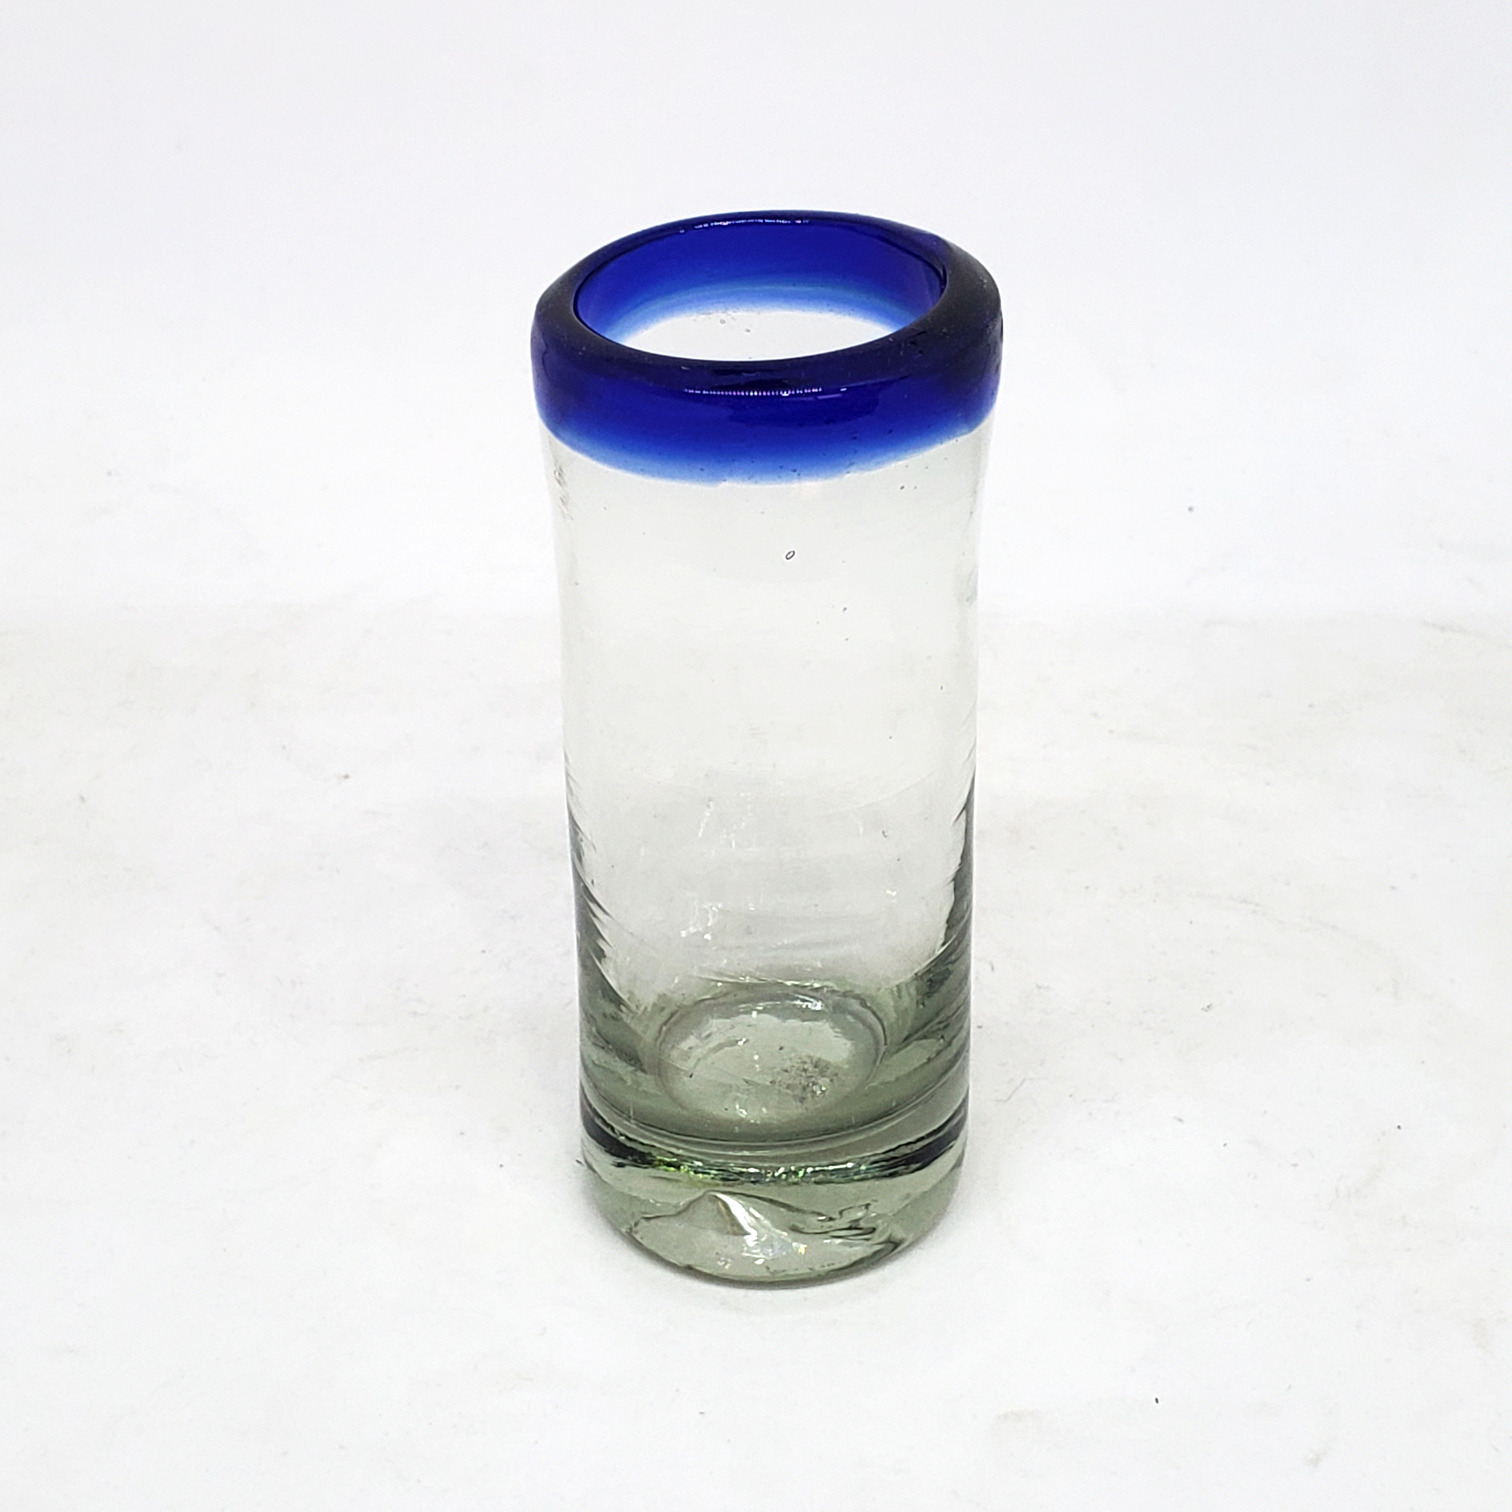 Wholesale Tequila Shot Glasses / Cobalt Blue Rim 2 oz Tequila Shot Glasses  / These shot glasses bordered in cobalt blue are perfect for sipping your favorite tequila or any other liquor.